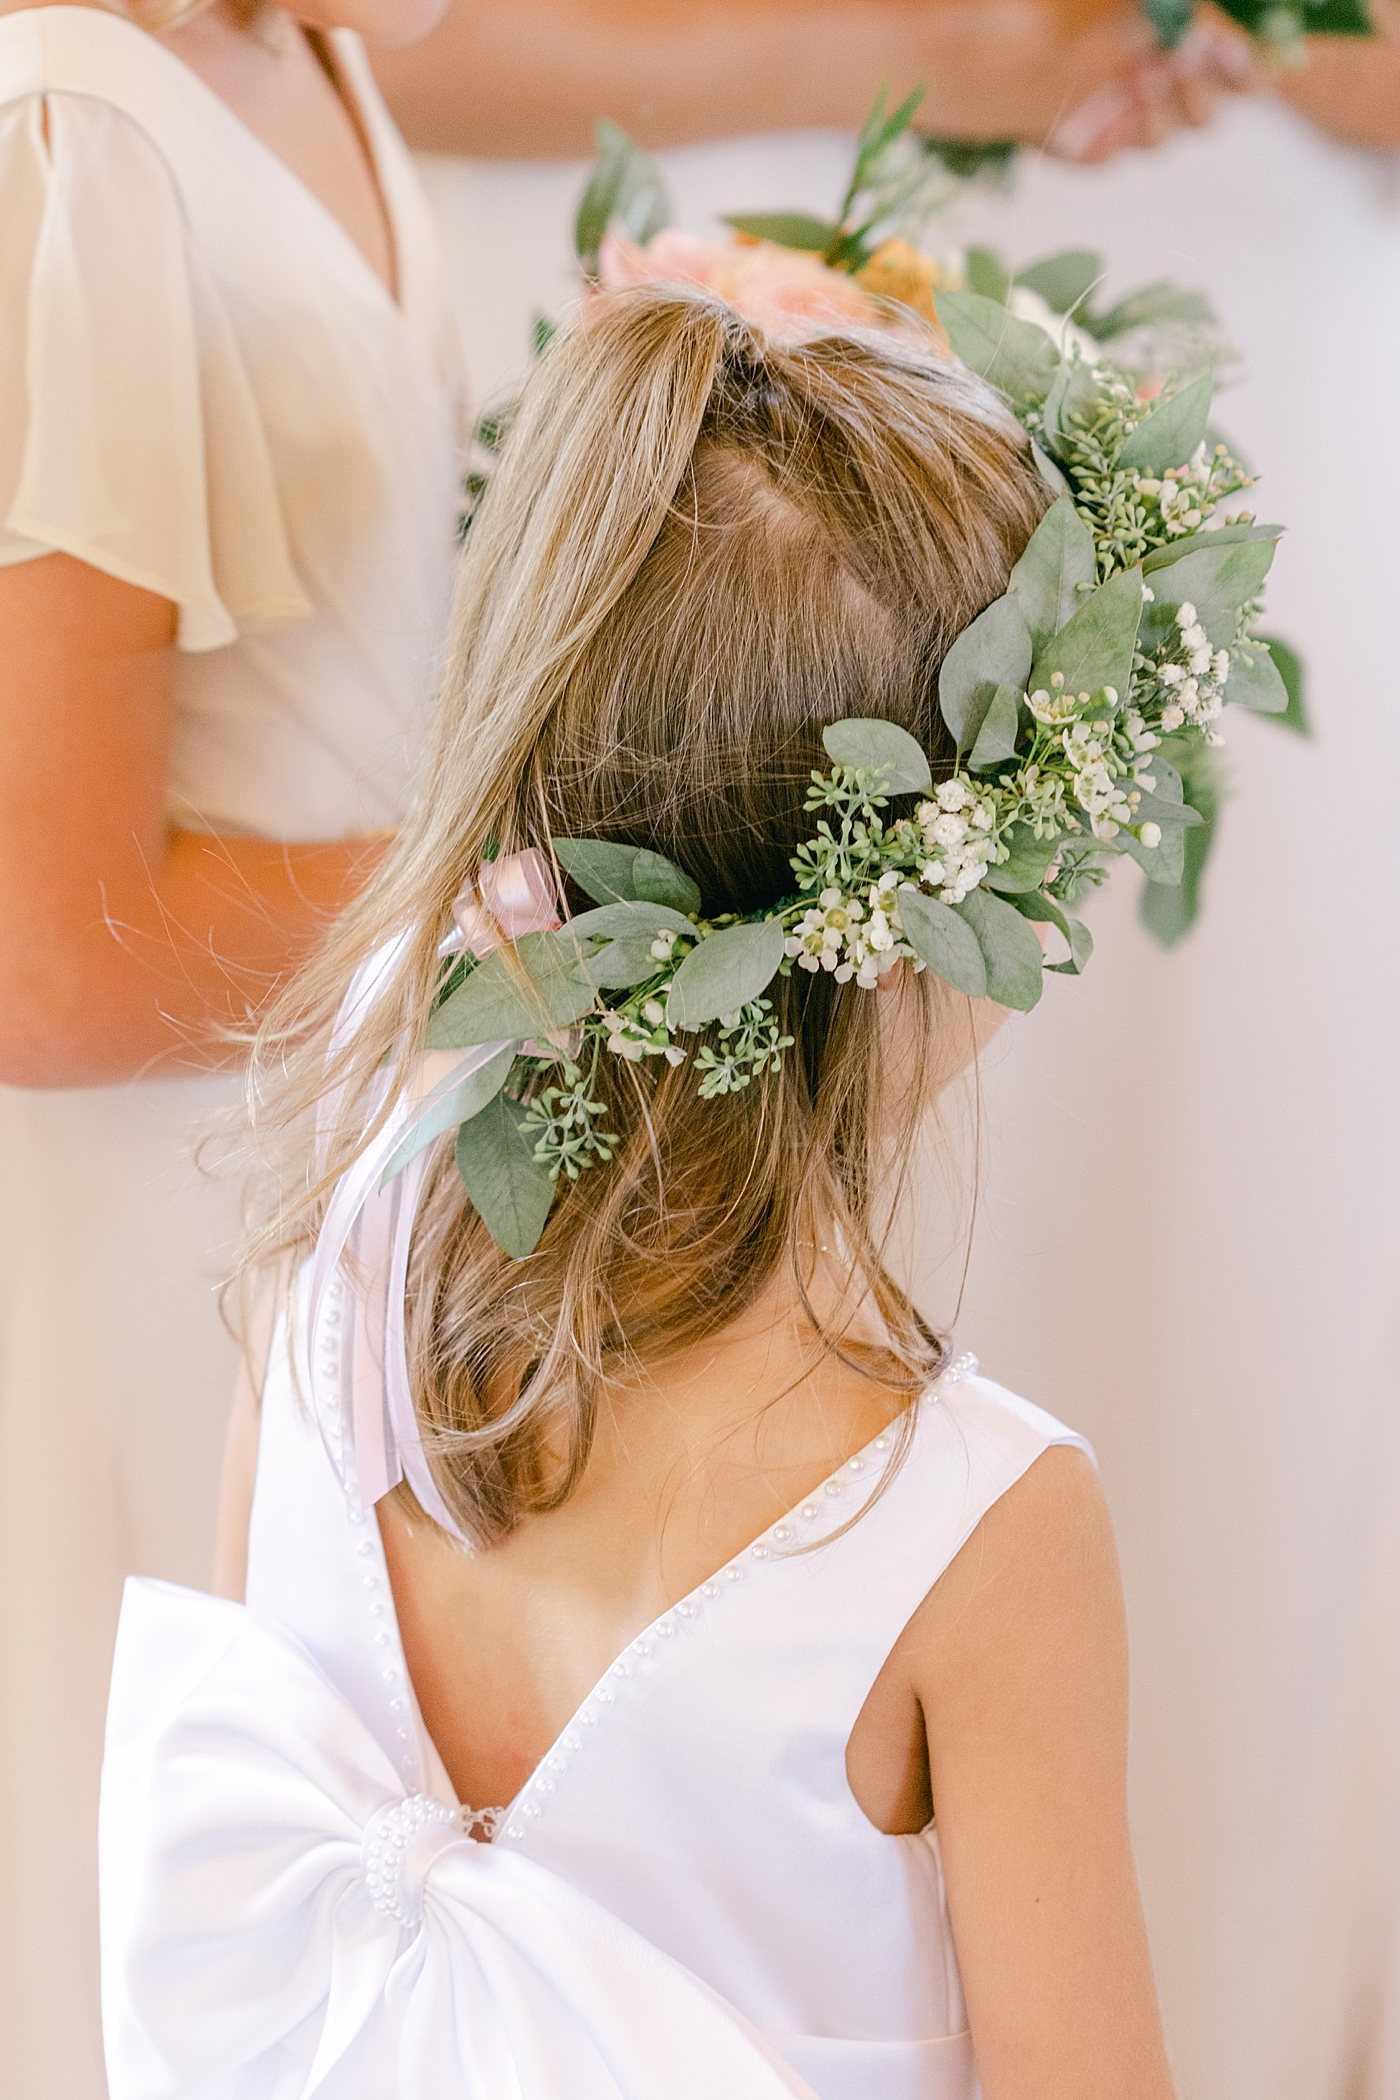 Flower girl with floral crown | Image by Hudson Valley Wedding Photographer Hope Helmuth